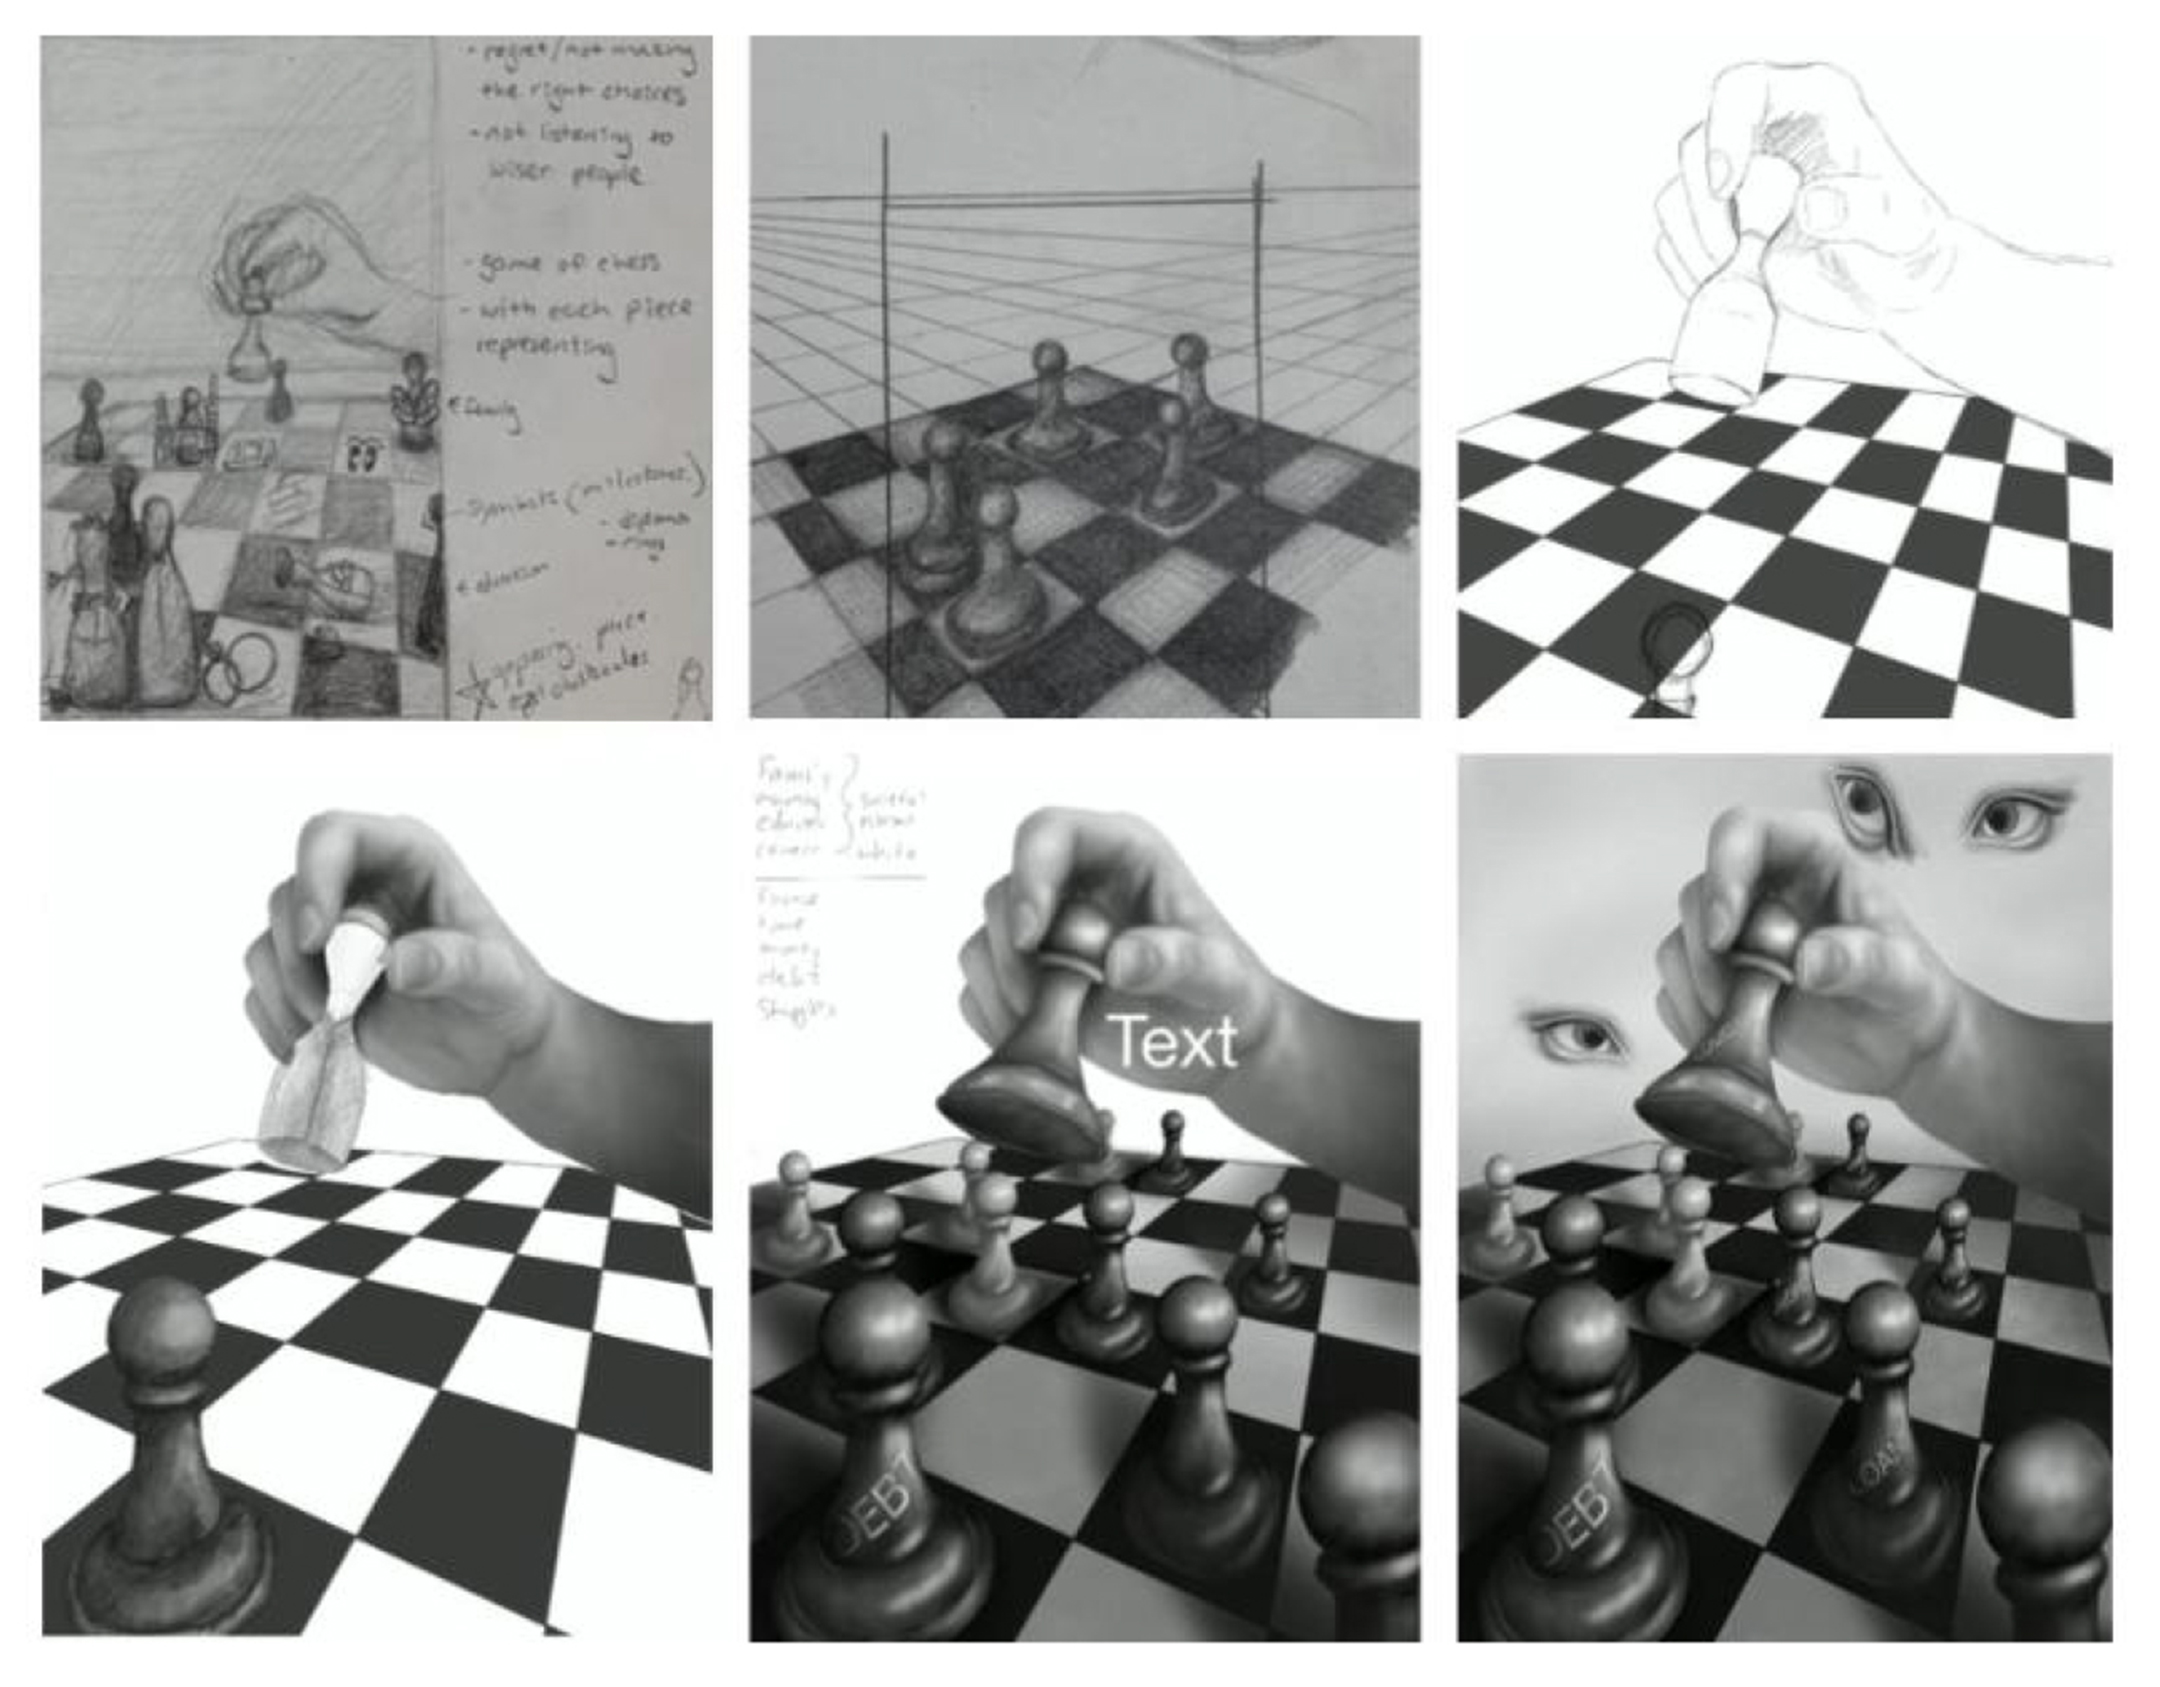 grid of six images, three by two, showing the process of making the chess board illustration